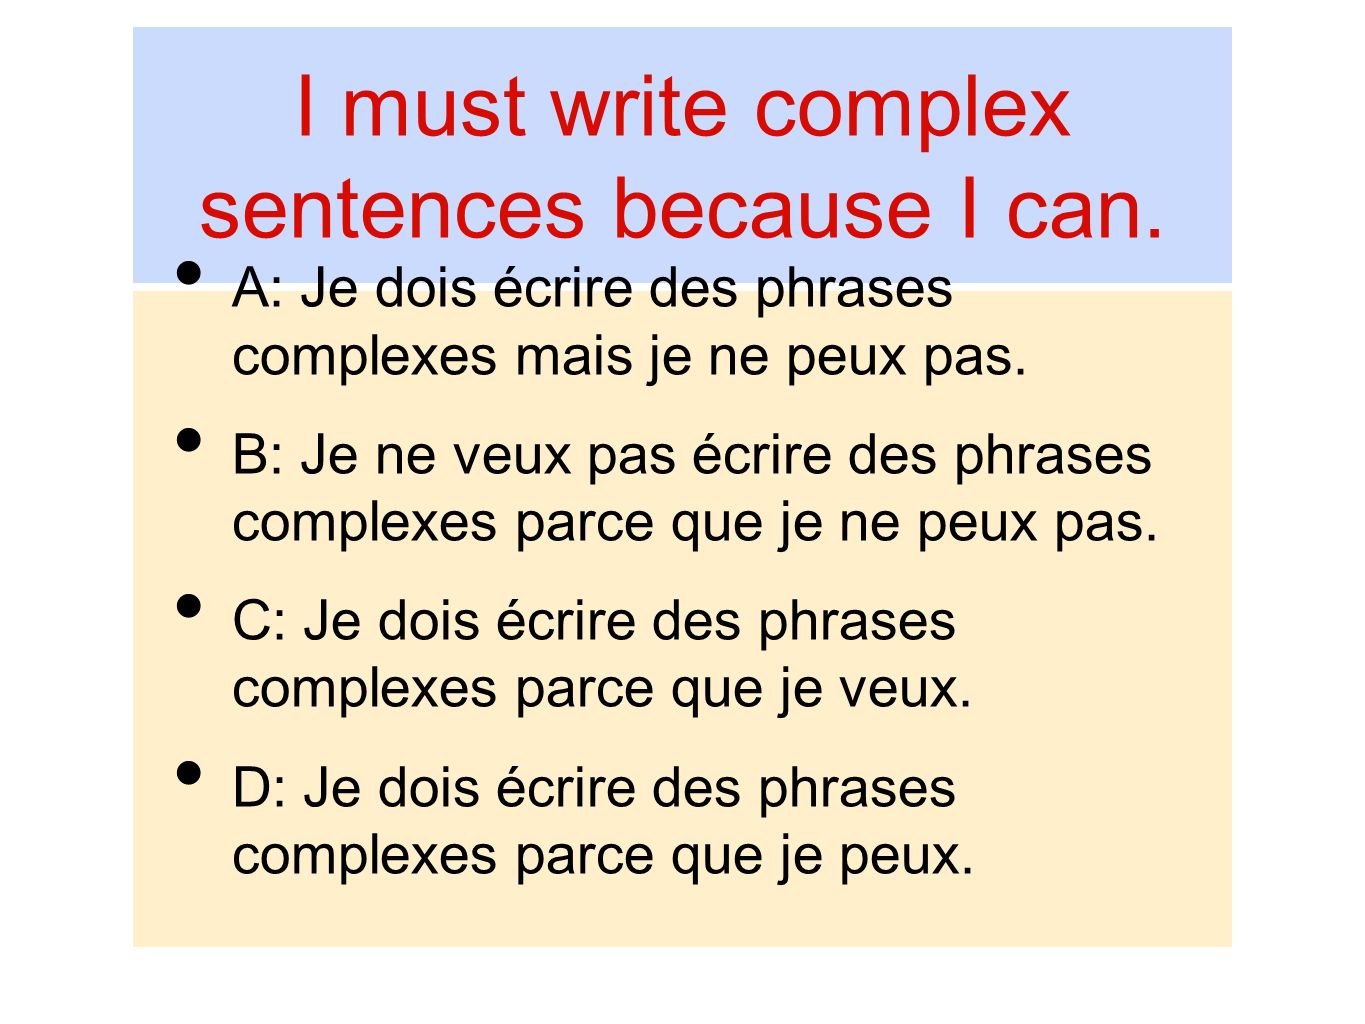 I must write complex sentences because I can.